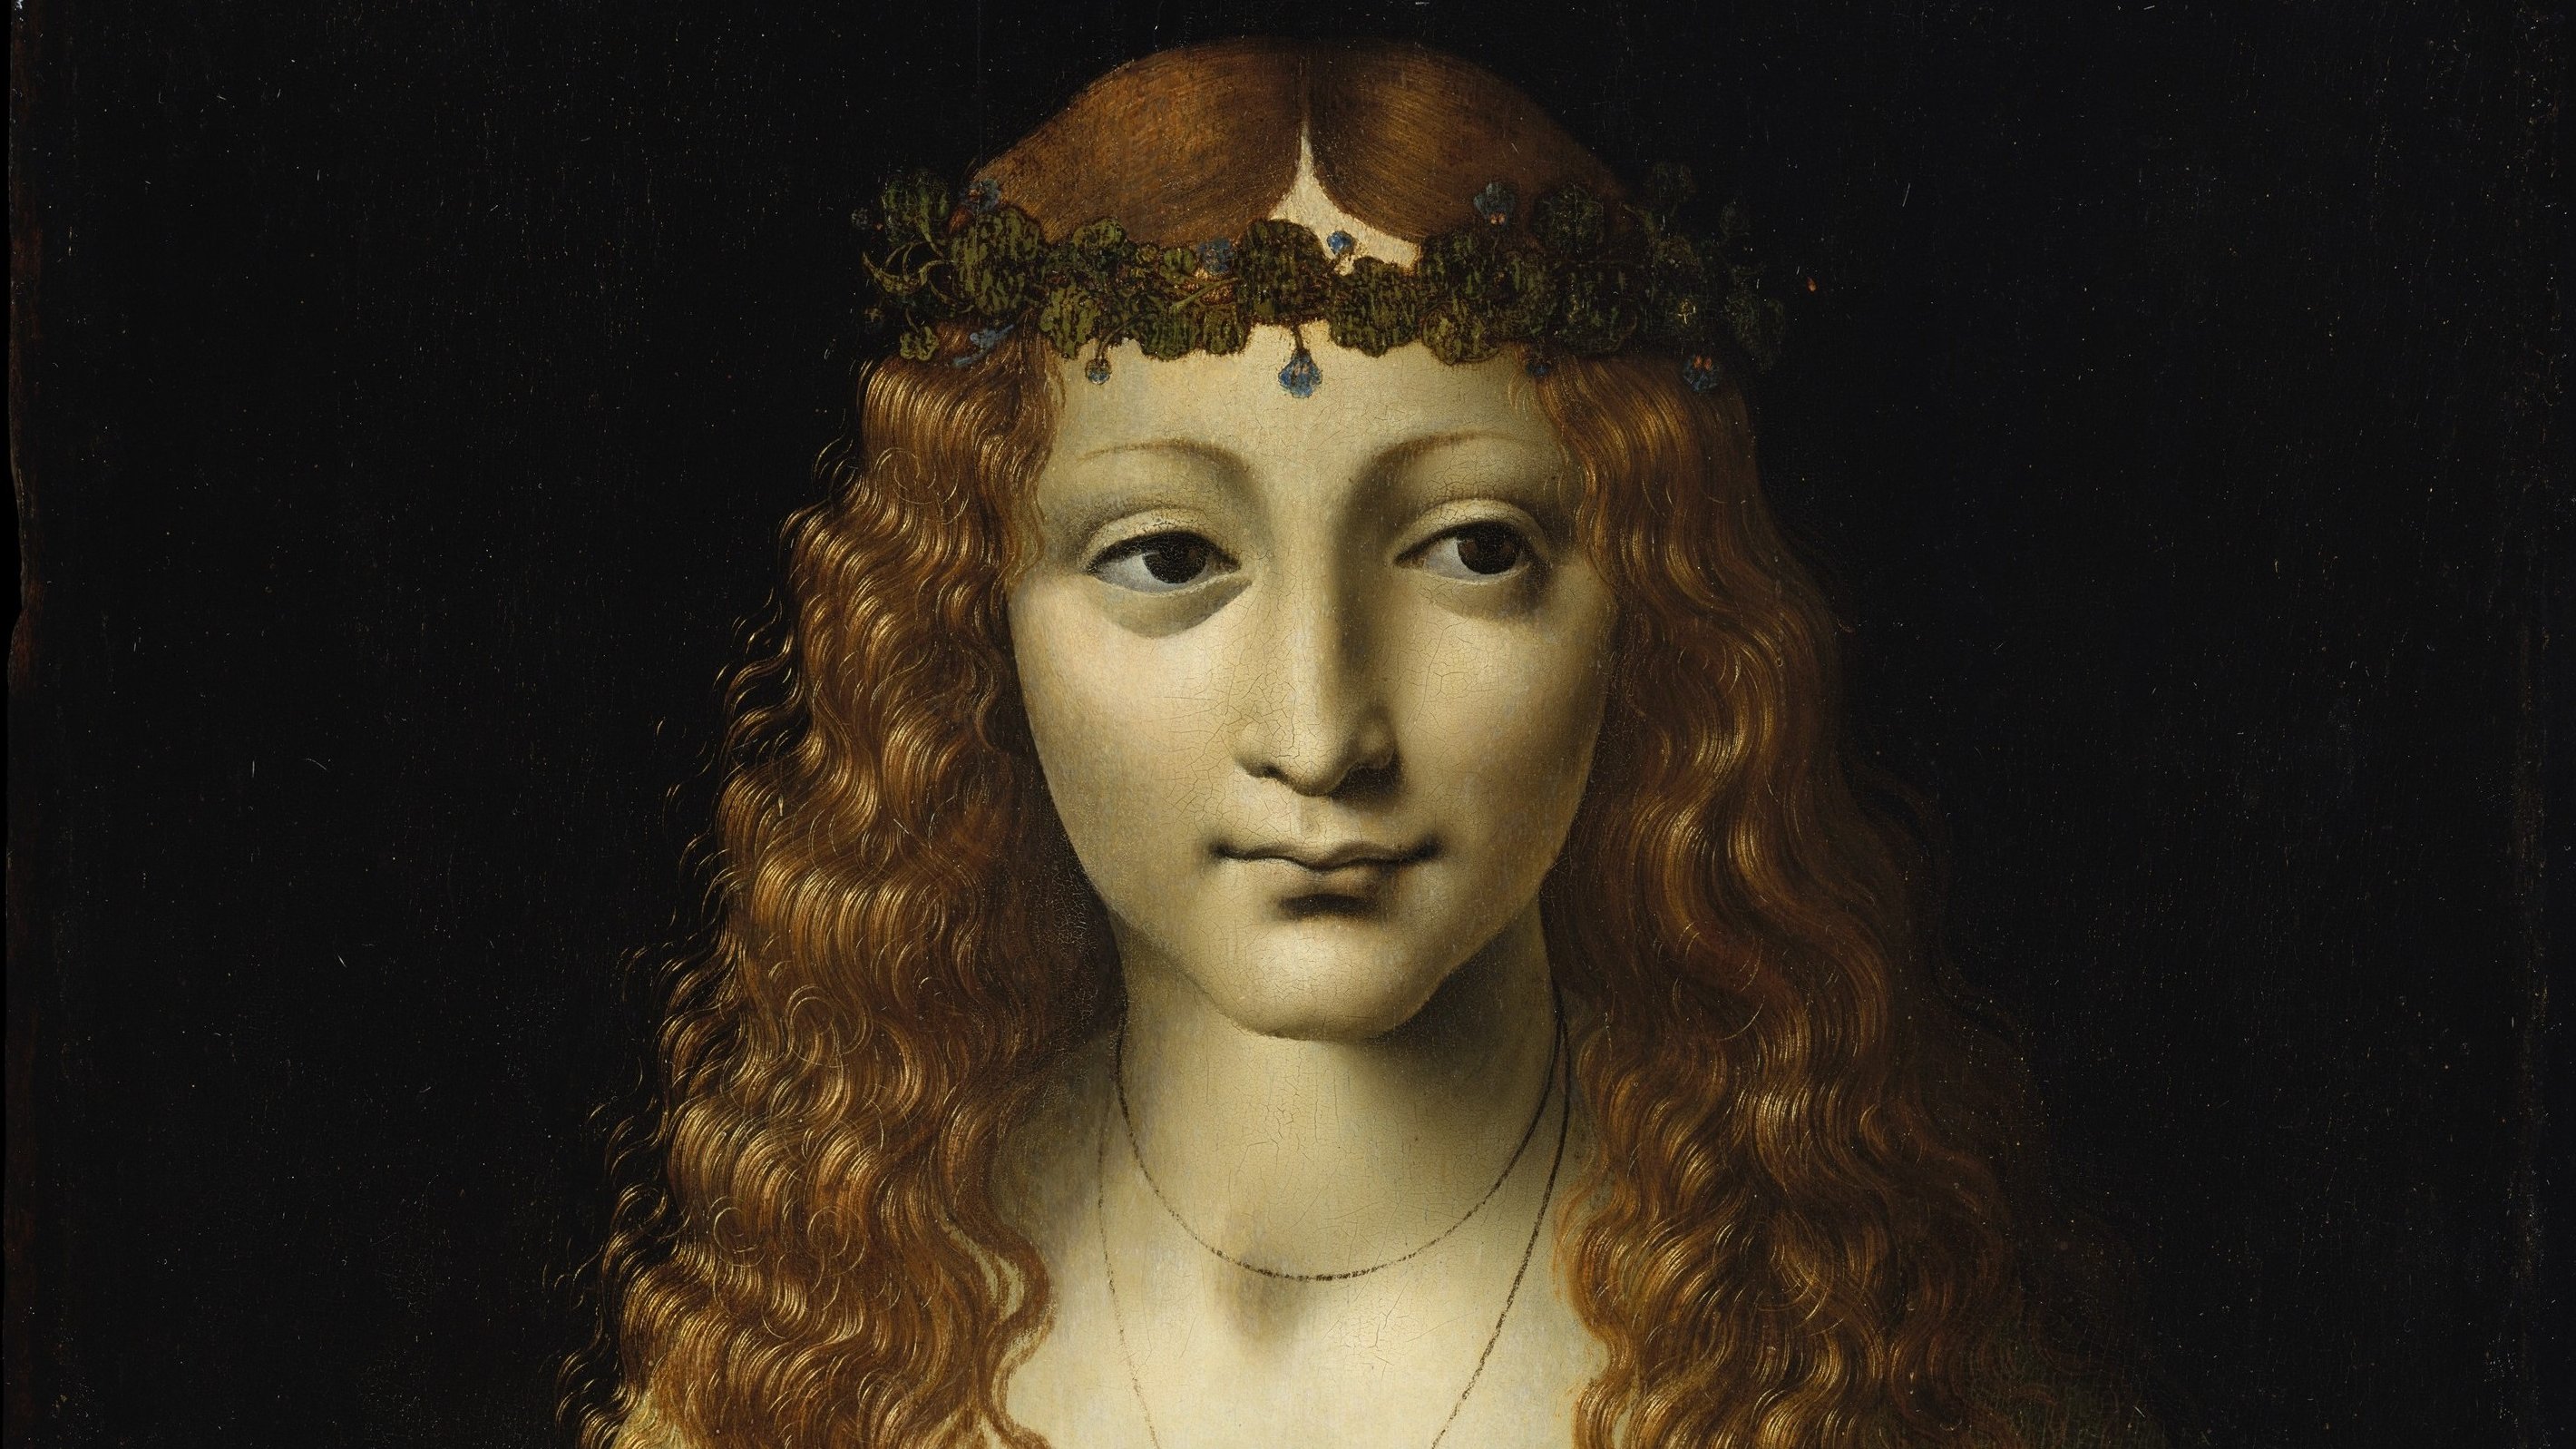 1472: Bianca Maria Sforza: The Empress who was Married at the Age of Two and Widowed at Ten